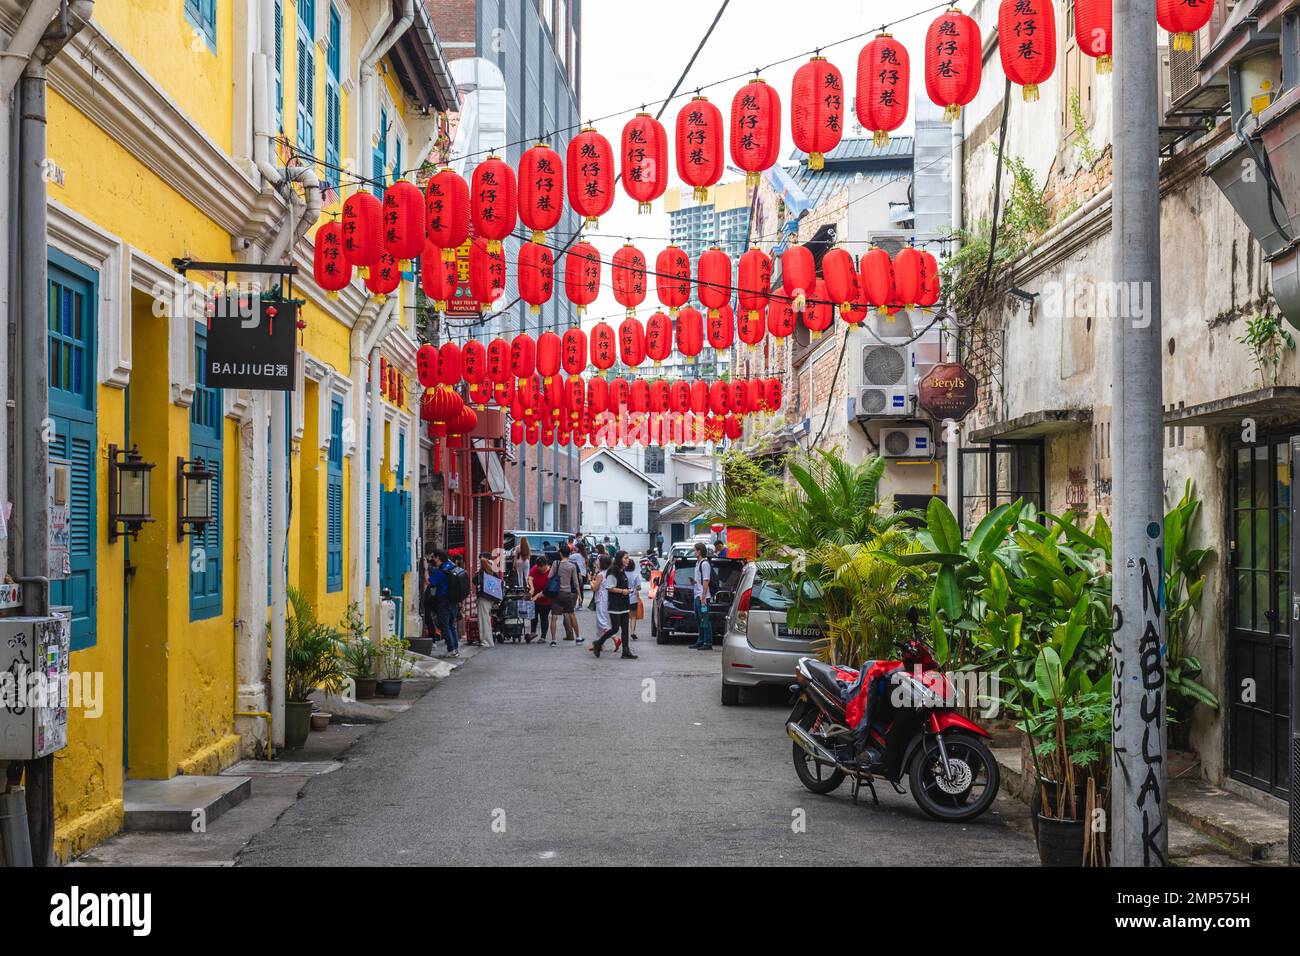 January 10, 2023: Kwai Chai Hong, a small alley behind Petaling Street in the Chinatown of Kuala Lumpur, Malaysia. There are numerous murals depicting Stock Photo